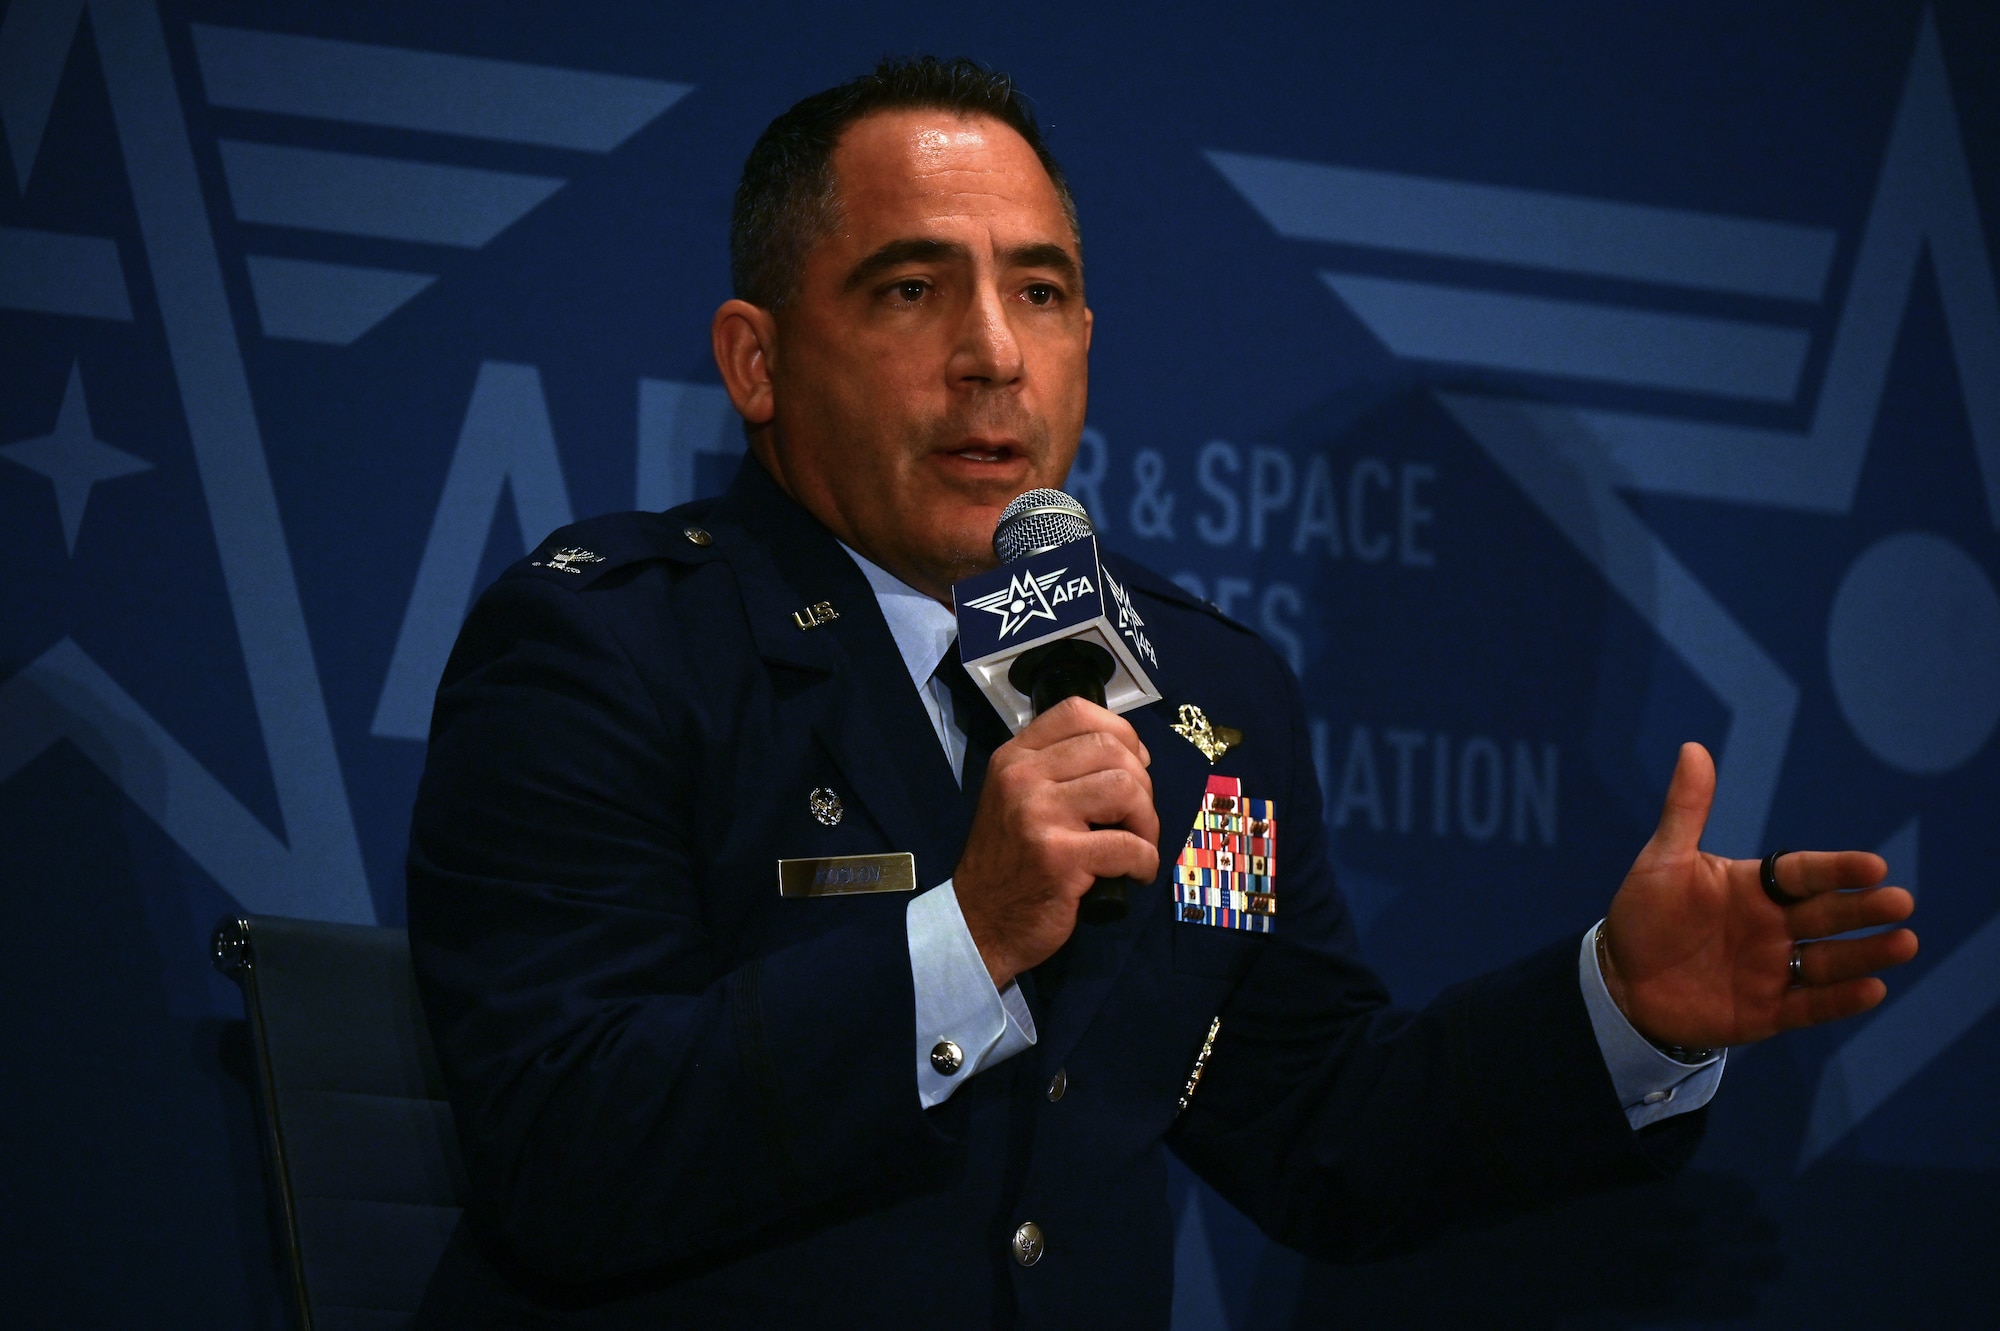 U.S. Air Force Col. Josh Koslov, 350th Spectrum Warfare Wing commander, serves as a panelist for the Spectrum Renaissance session during the Air & Space Forces Association’s (AFA) Air, Space & Cyber Conference at the Gaylord National Resort & Convention Center in National Harbor, Md., Sept. 13, 2023. During the panel, Koslov discussed the five strategic areas to propel EMS capability: Crowd-Sourced Flight Data, Electromagnetic Battlefield Management, Cognitive EW, Data Architecture, and EW Assessments. (U.S. Air Force photo by Staff Sgt. Ericka A. Woolever)